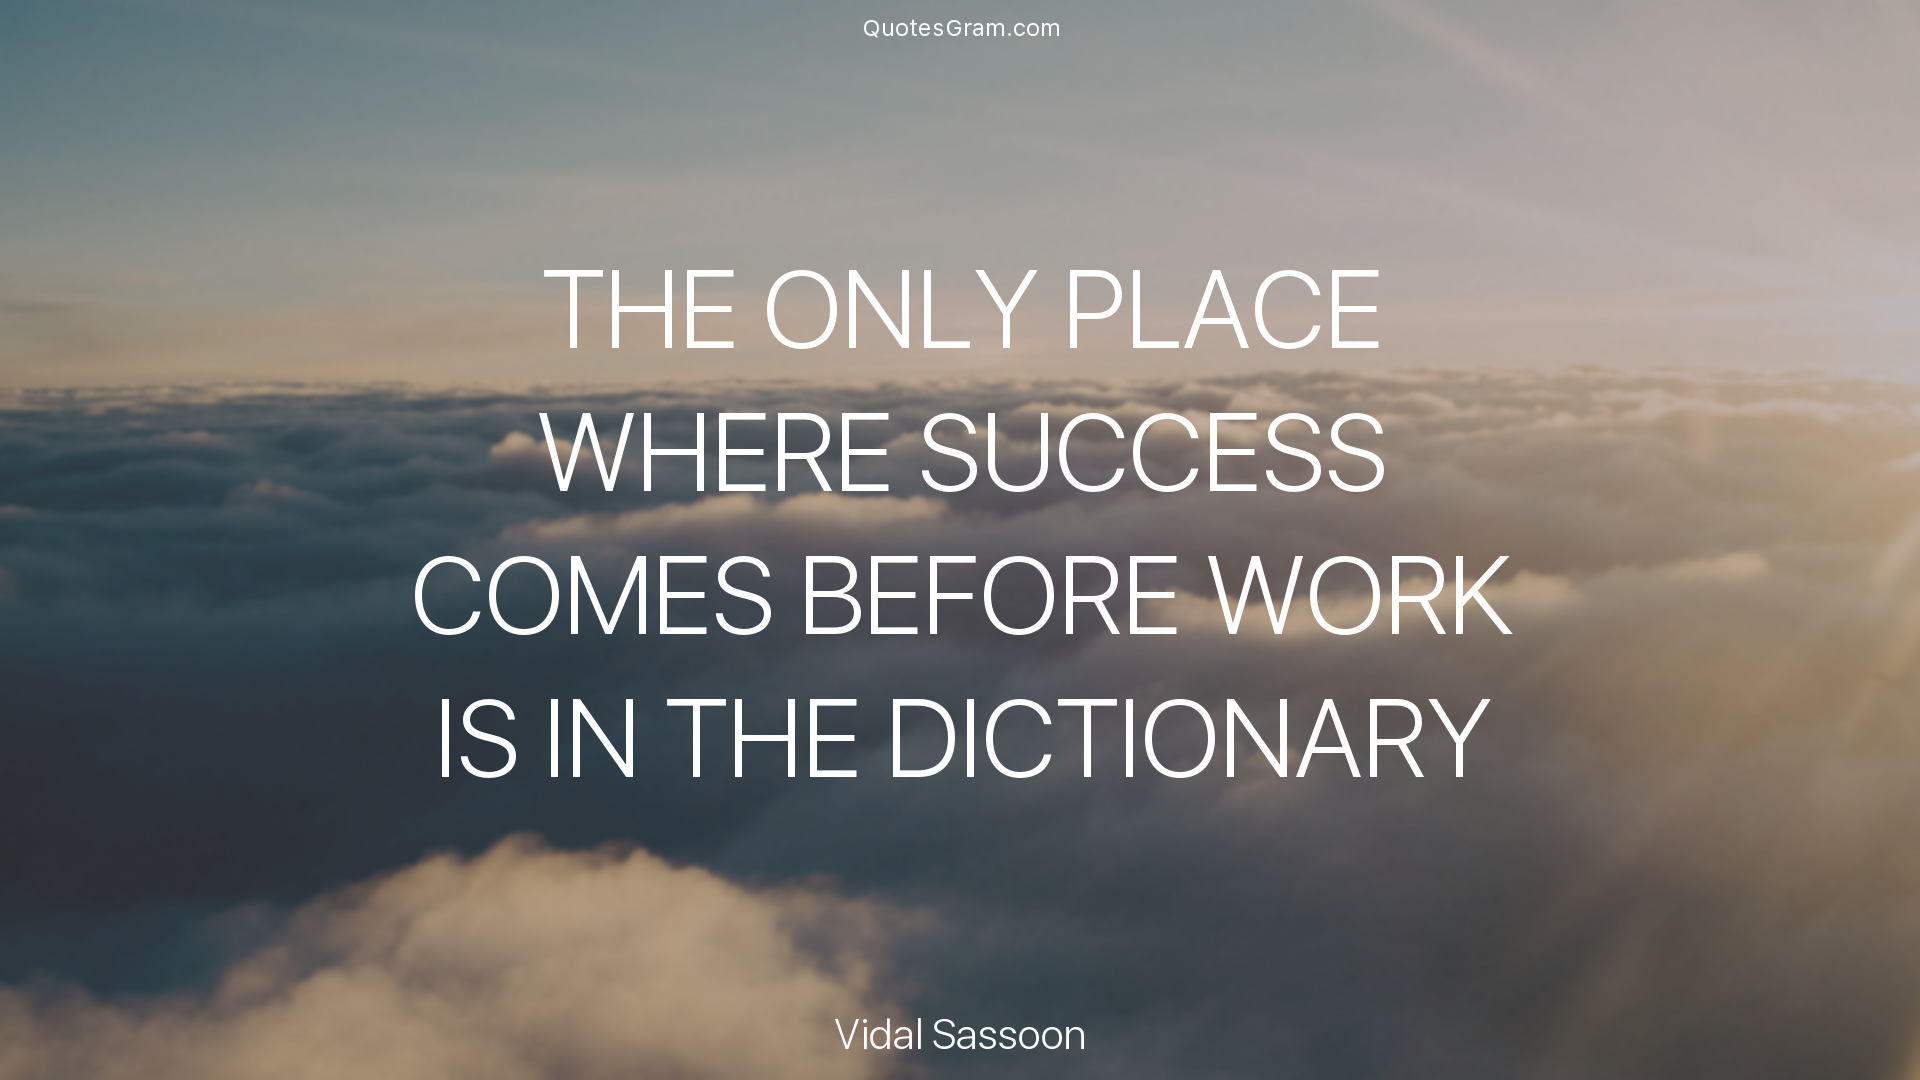 vidal-sassoon-quote-the-only-place-where-success-comes-before-work-is.png